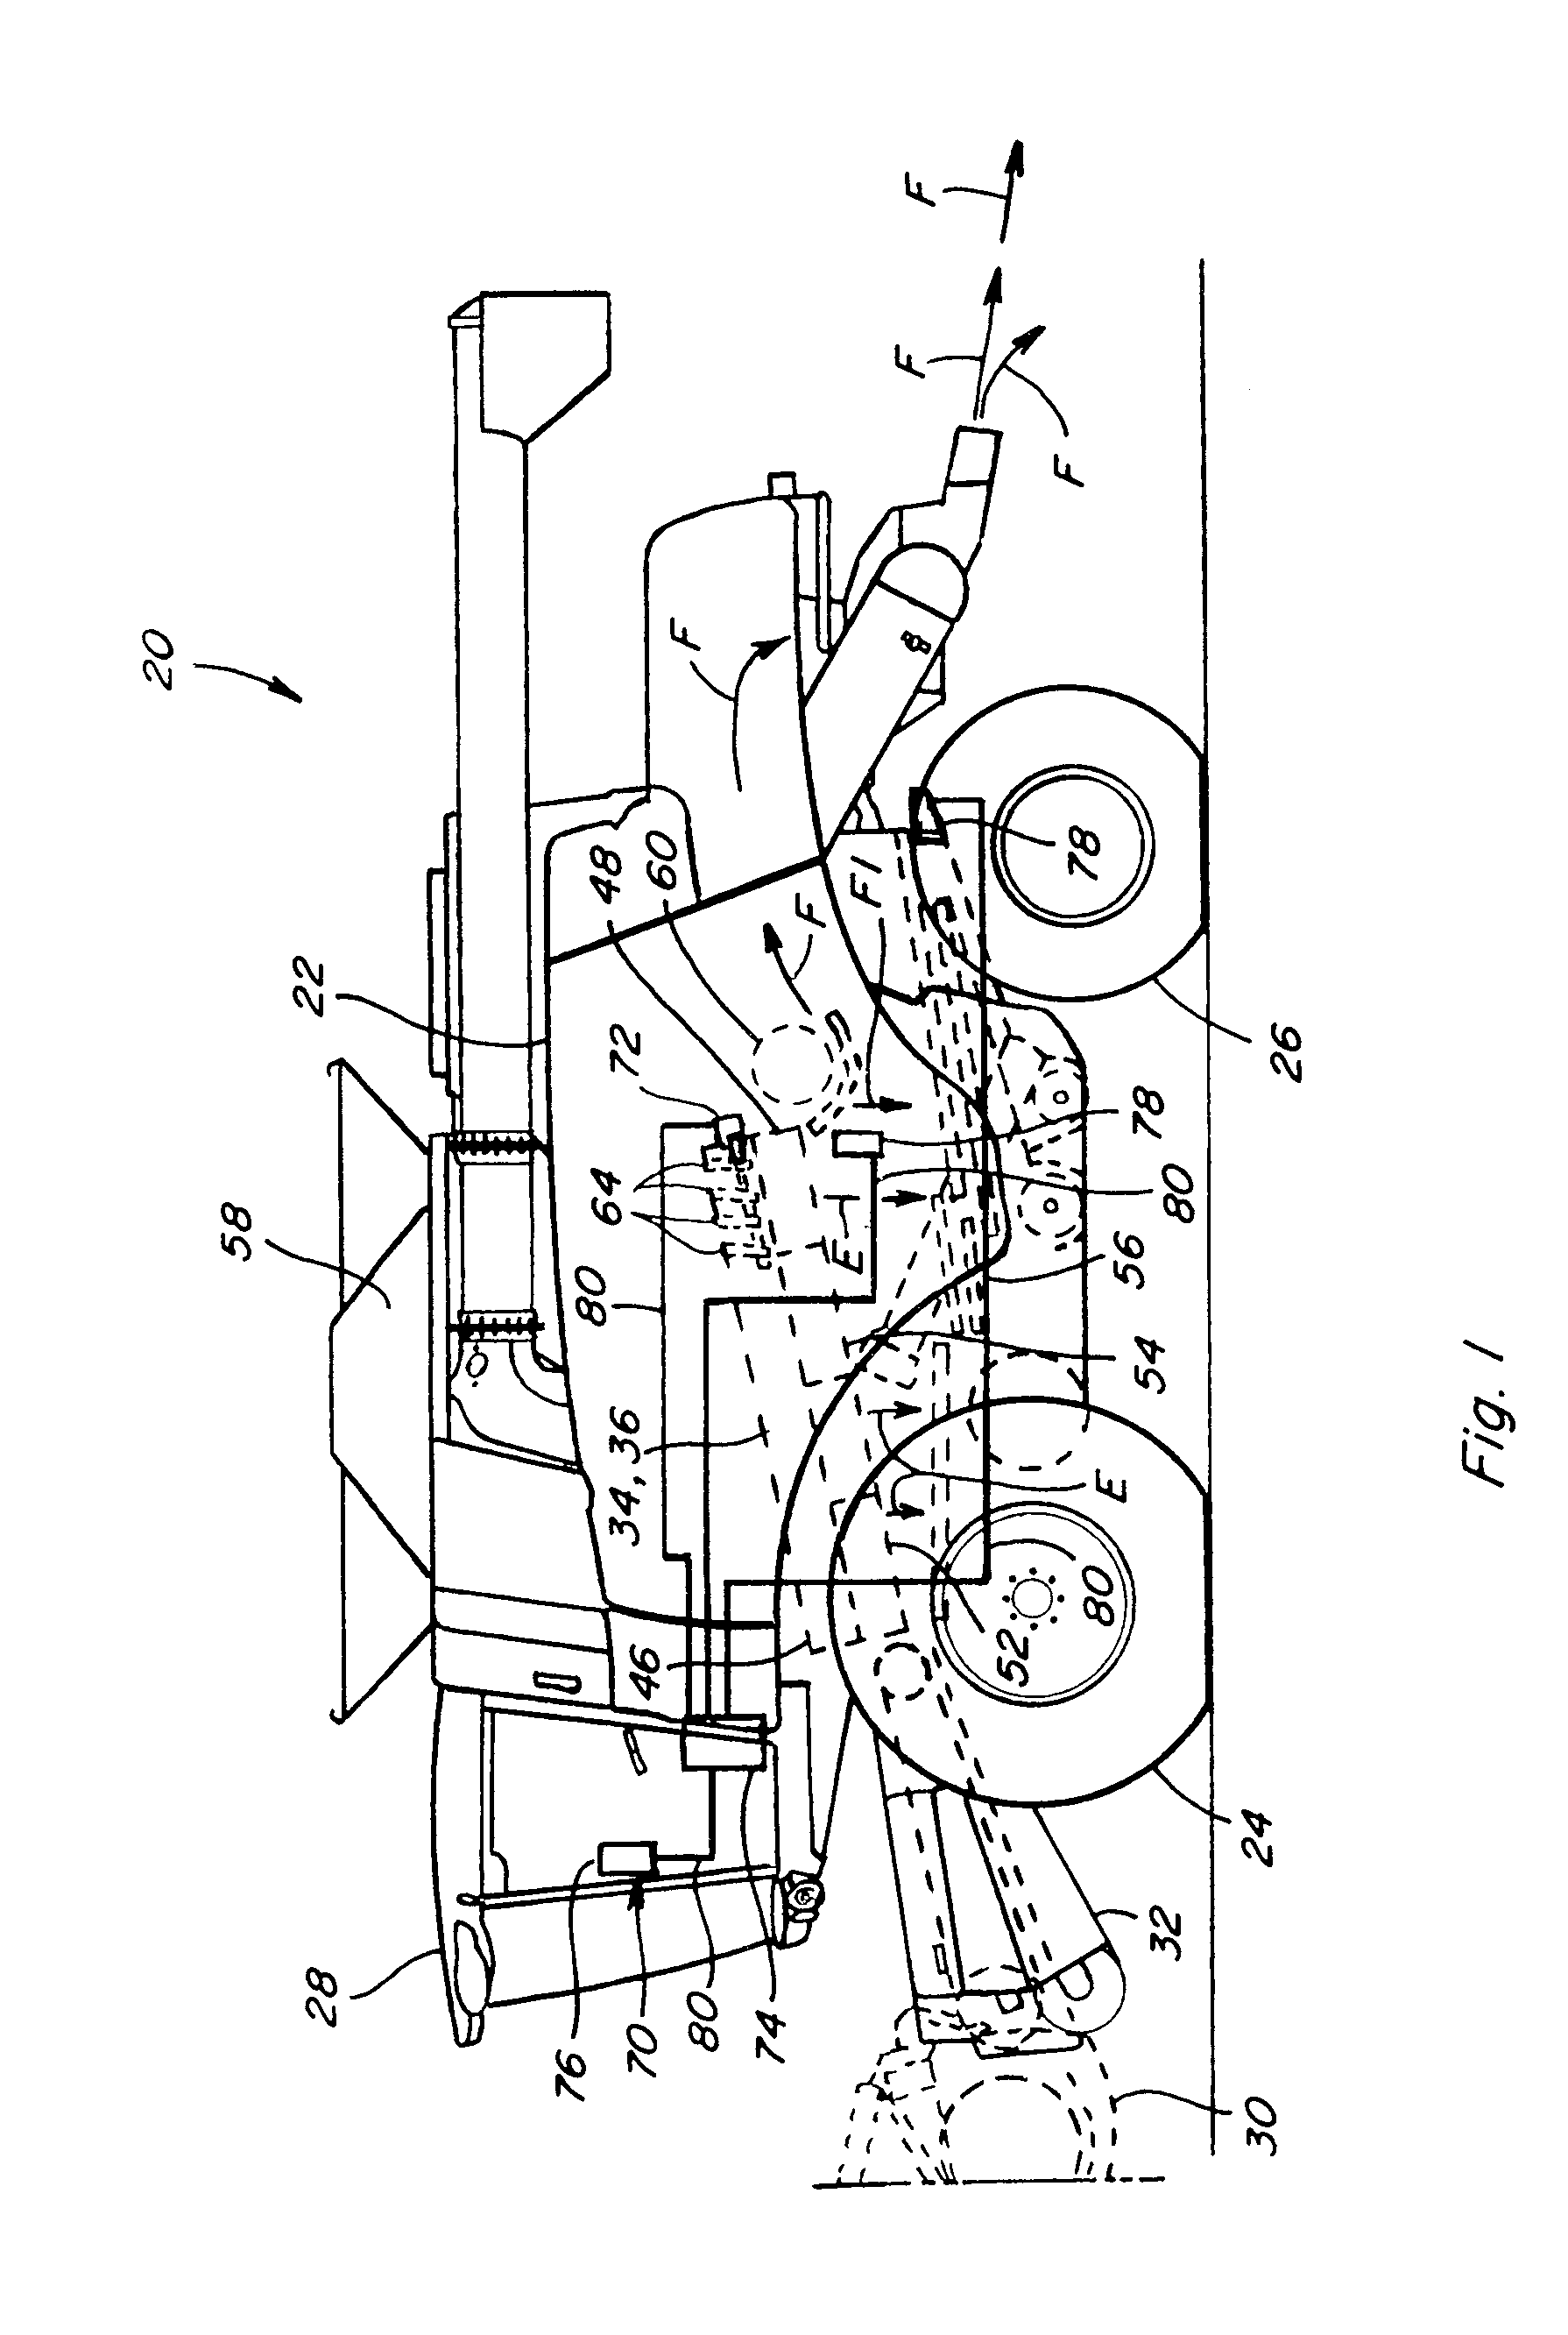 Remote control adjustable threshing cage vane system and method